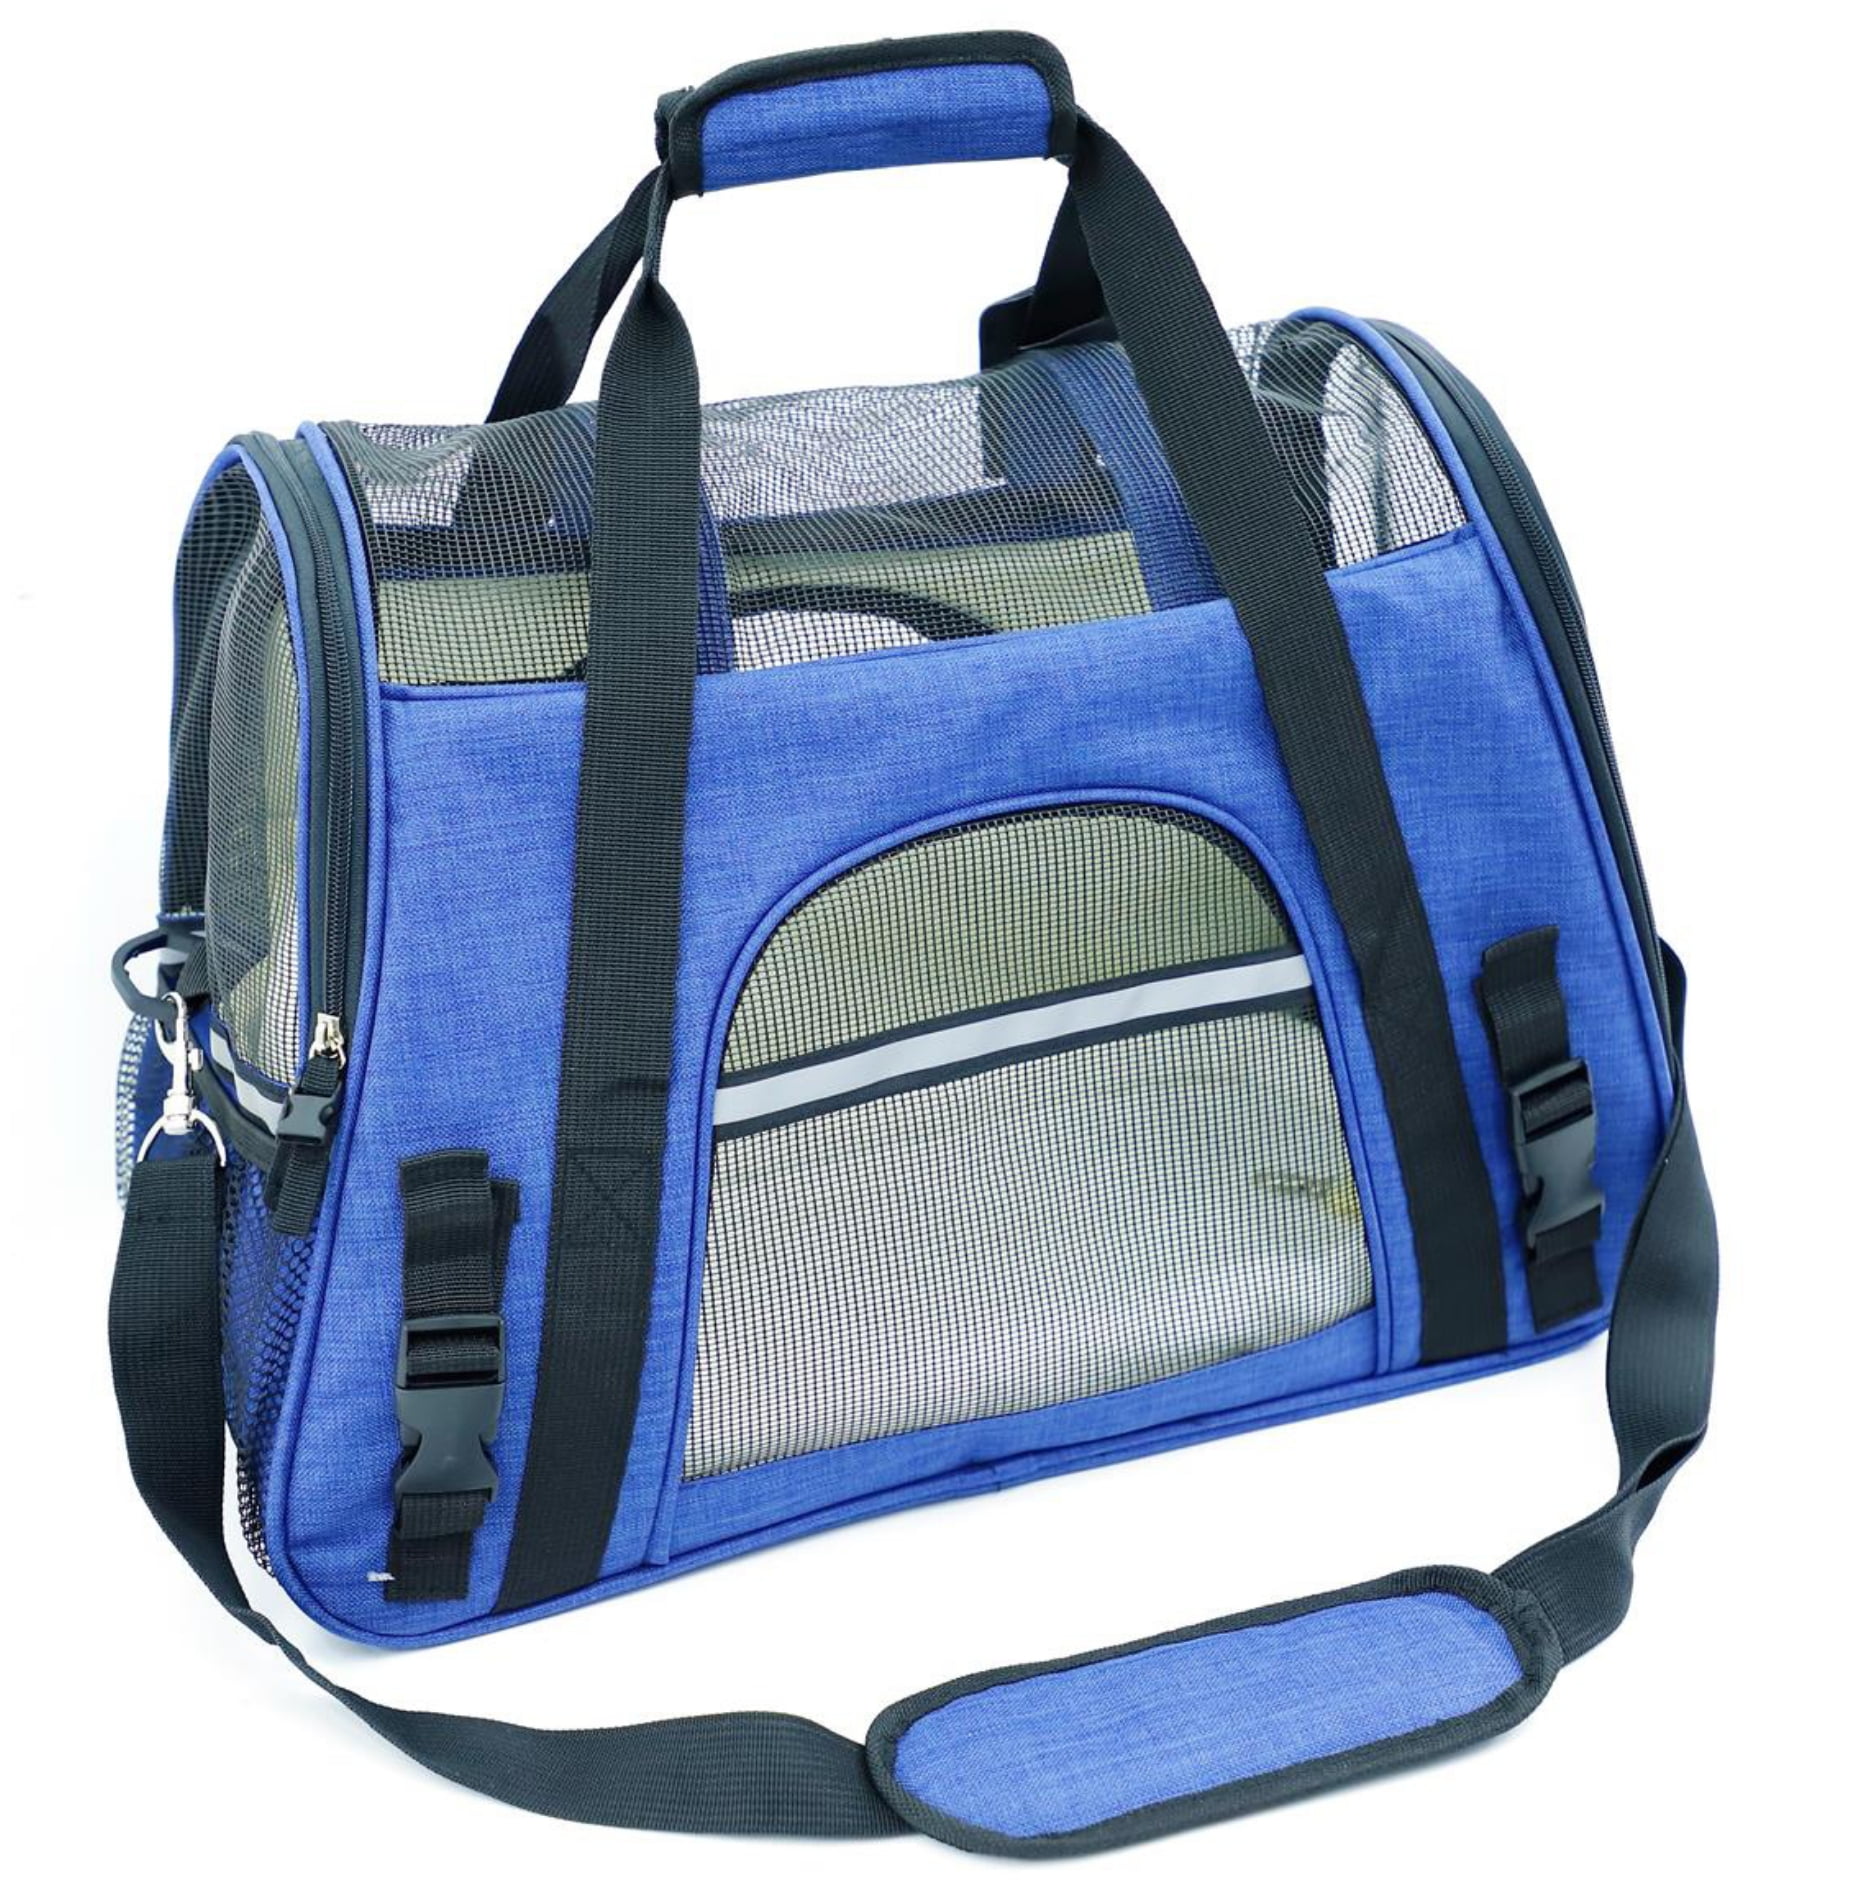 Soft Sided w/ Fleece Bed Premium Pet Carrier Airline Approved 